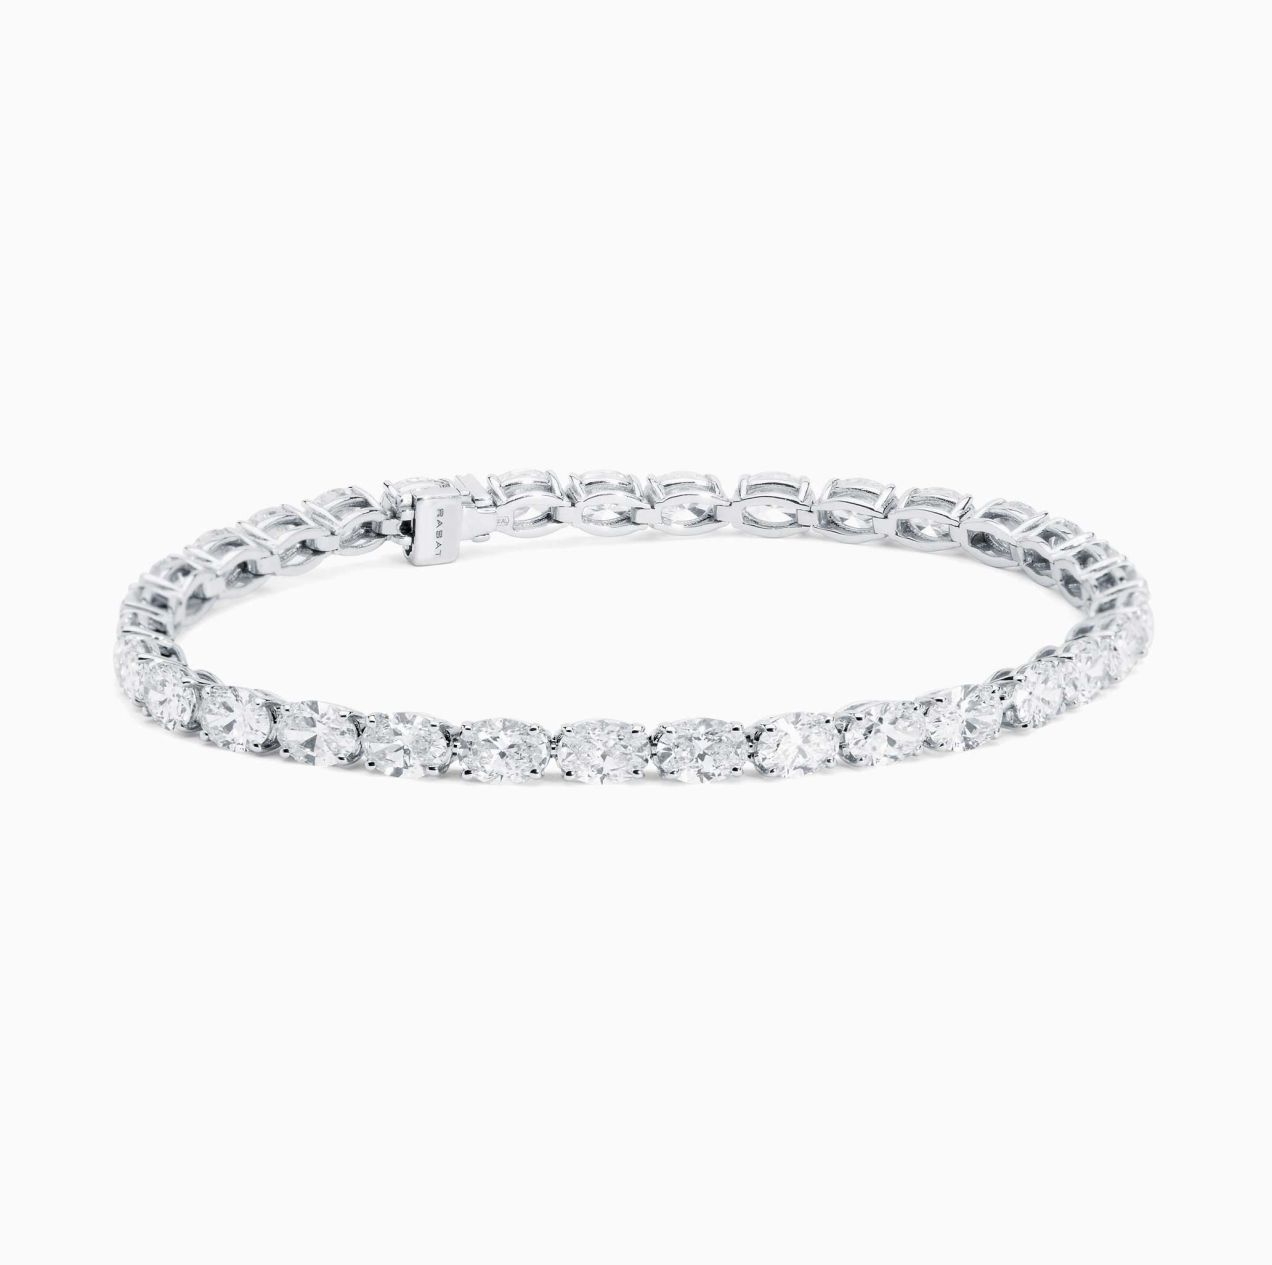 White gold and diamonds riviere bracelet